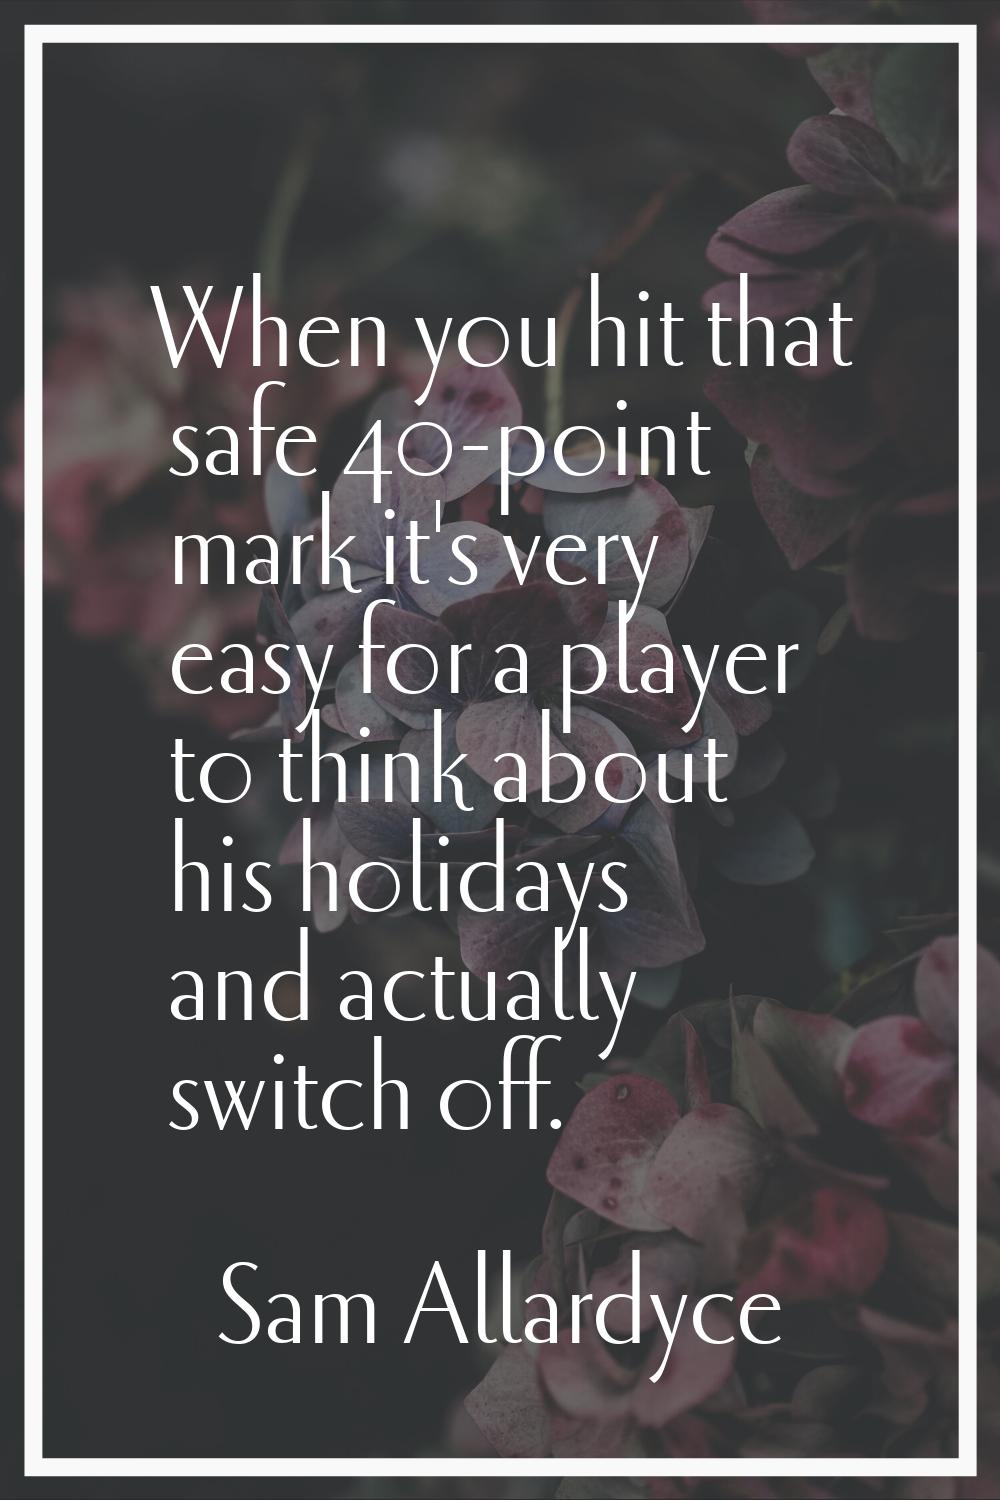 When you hit that safe 40-point mark it's very easy for a player to think about his holidays and ac